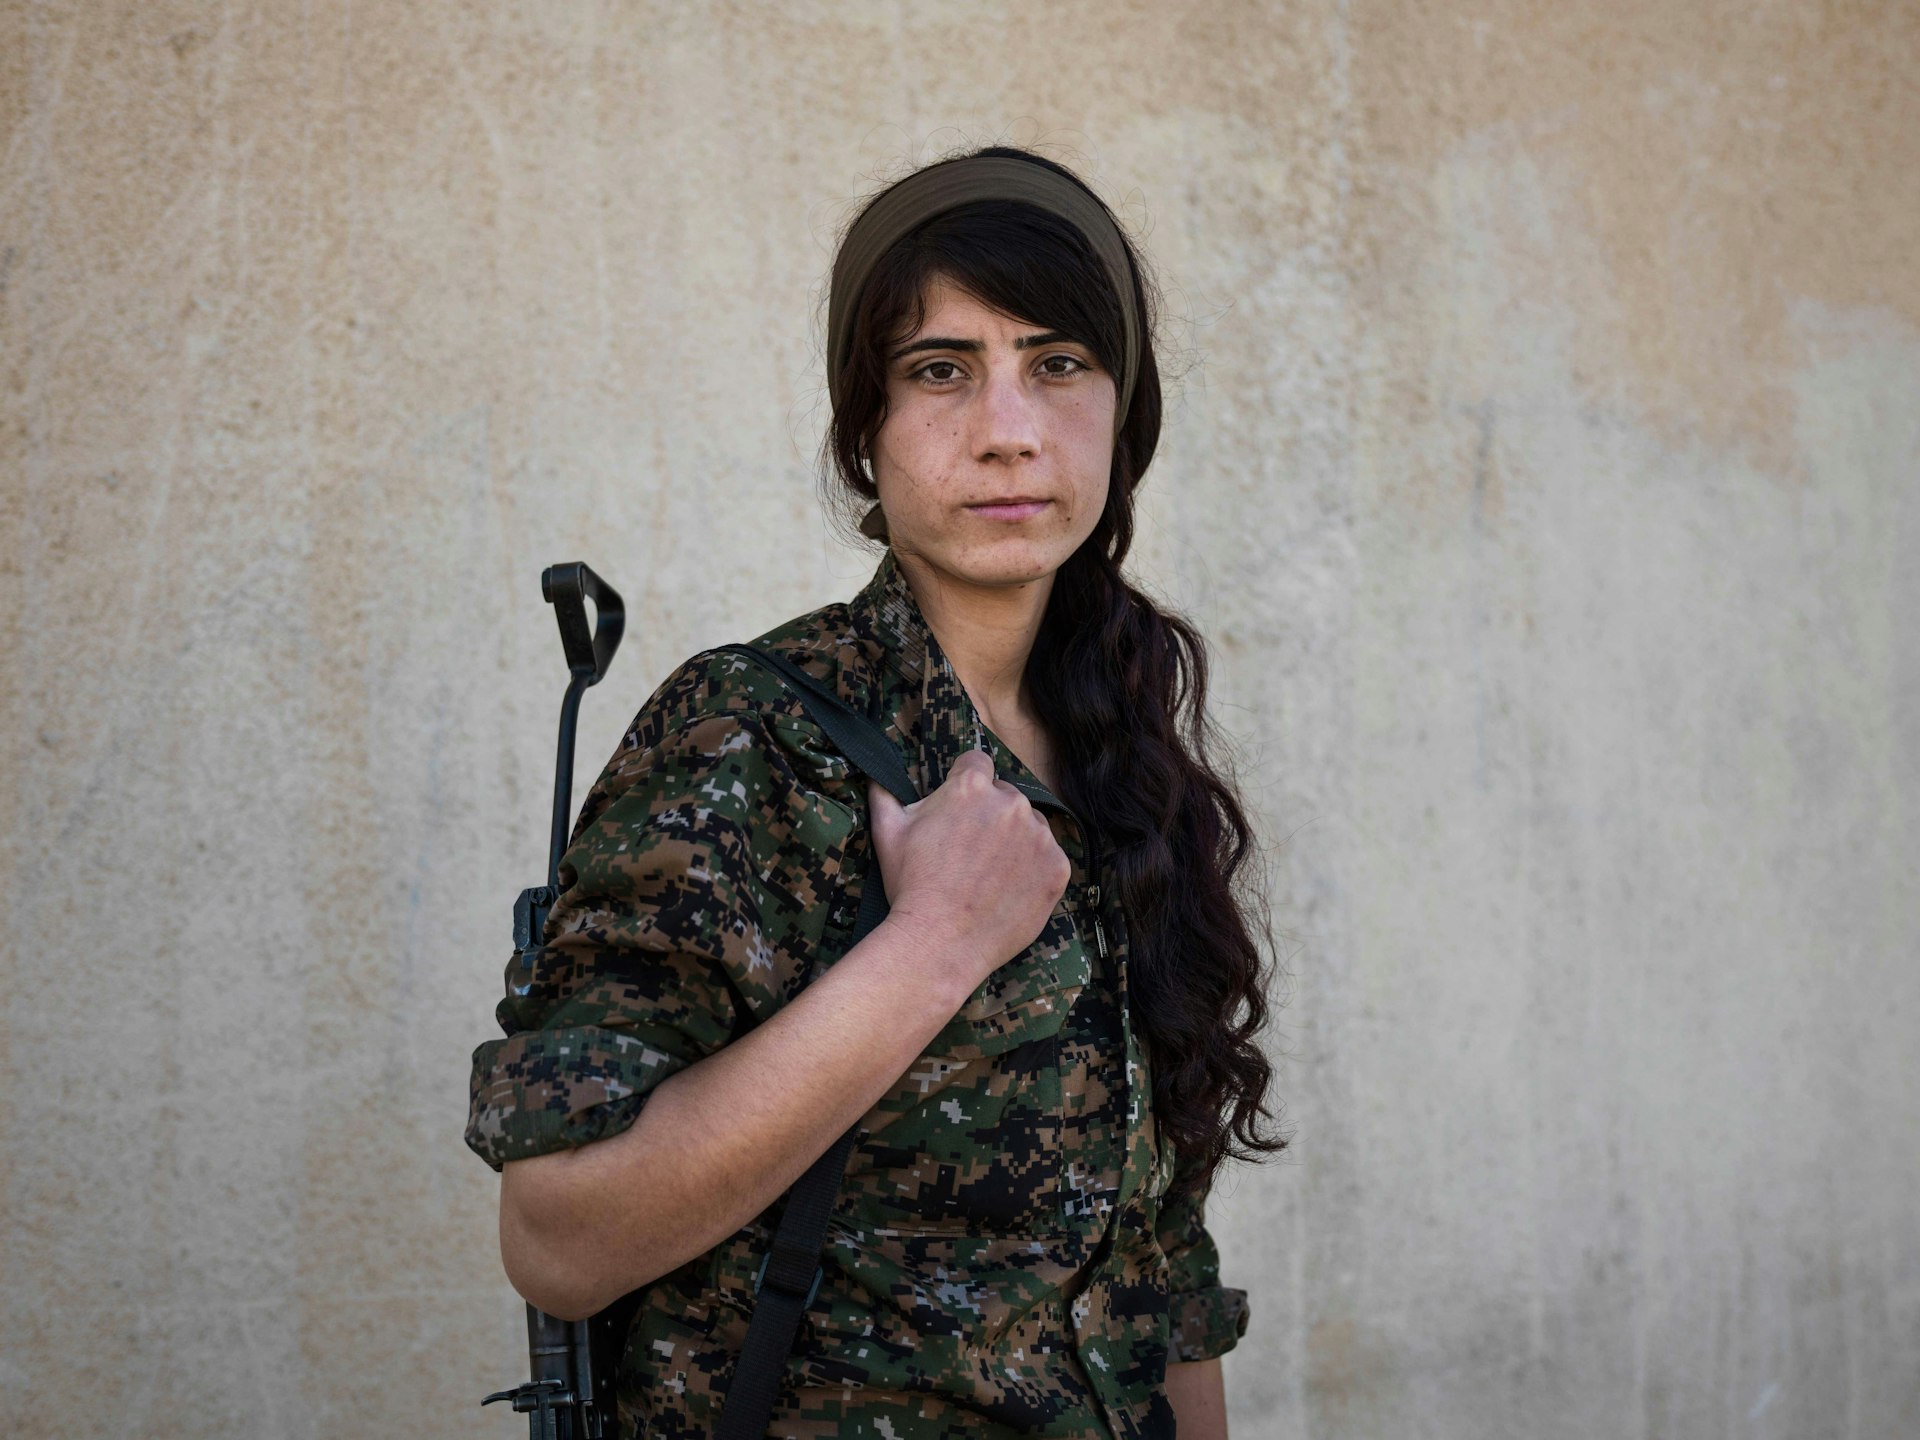 Suzdar, twenty-one, joined YPJ four years ago. "When the revolution happened in Rojava, I knew that I wanted to have a role in it." © Newsha Tavakolian / Magnum Photos